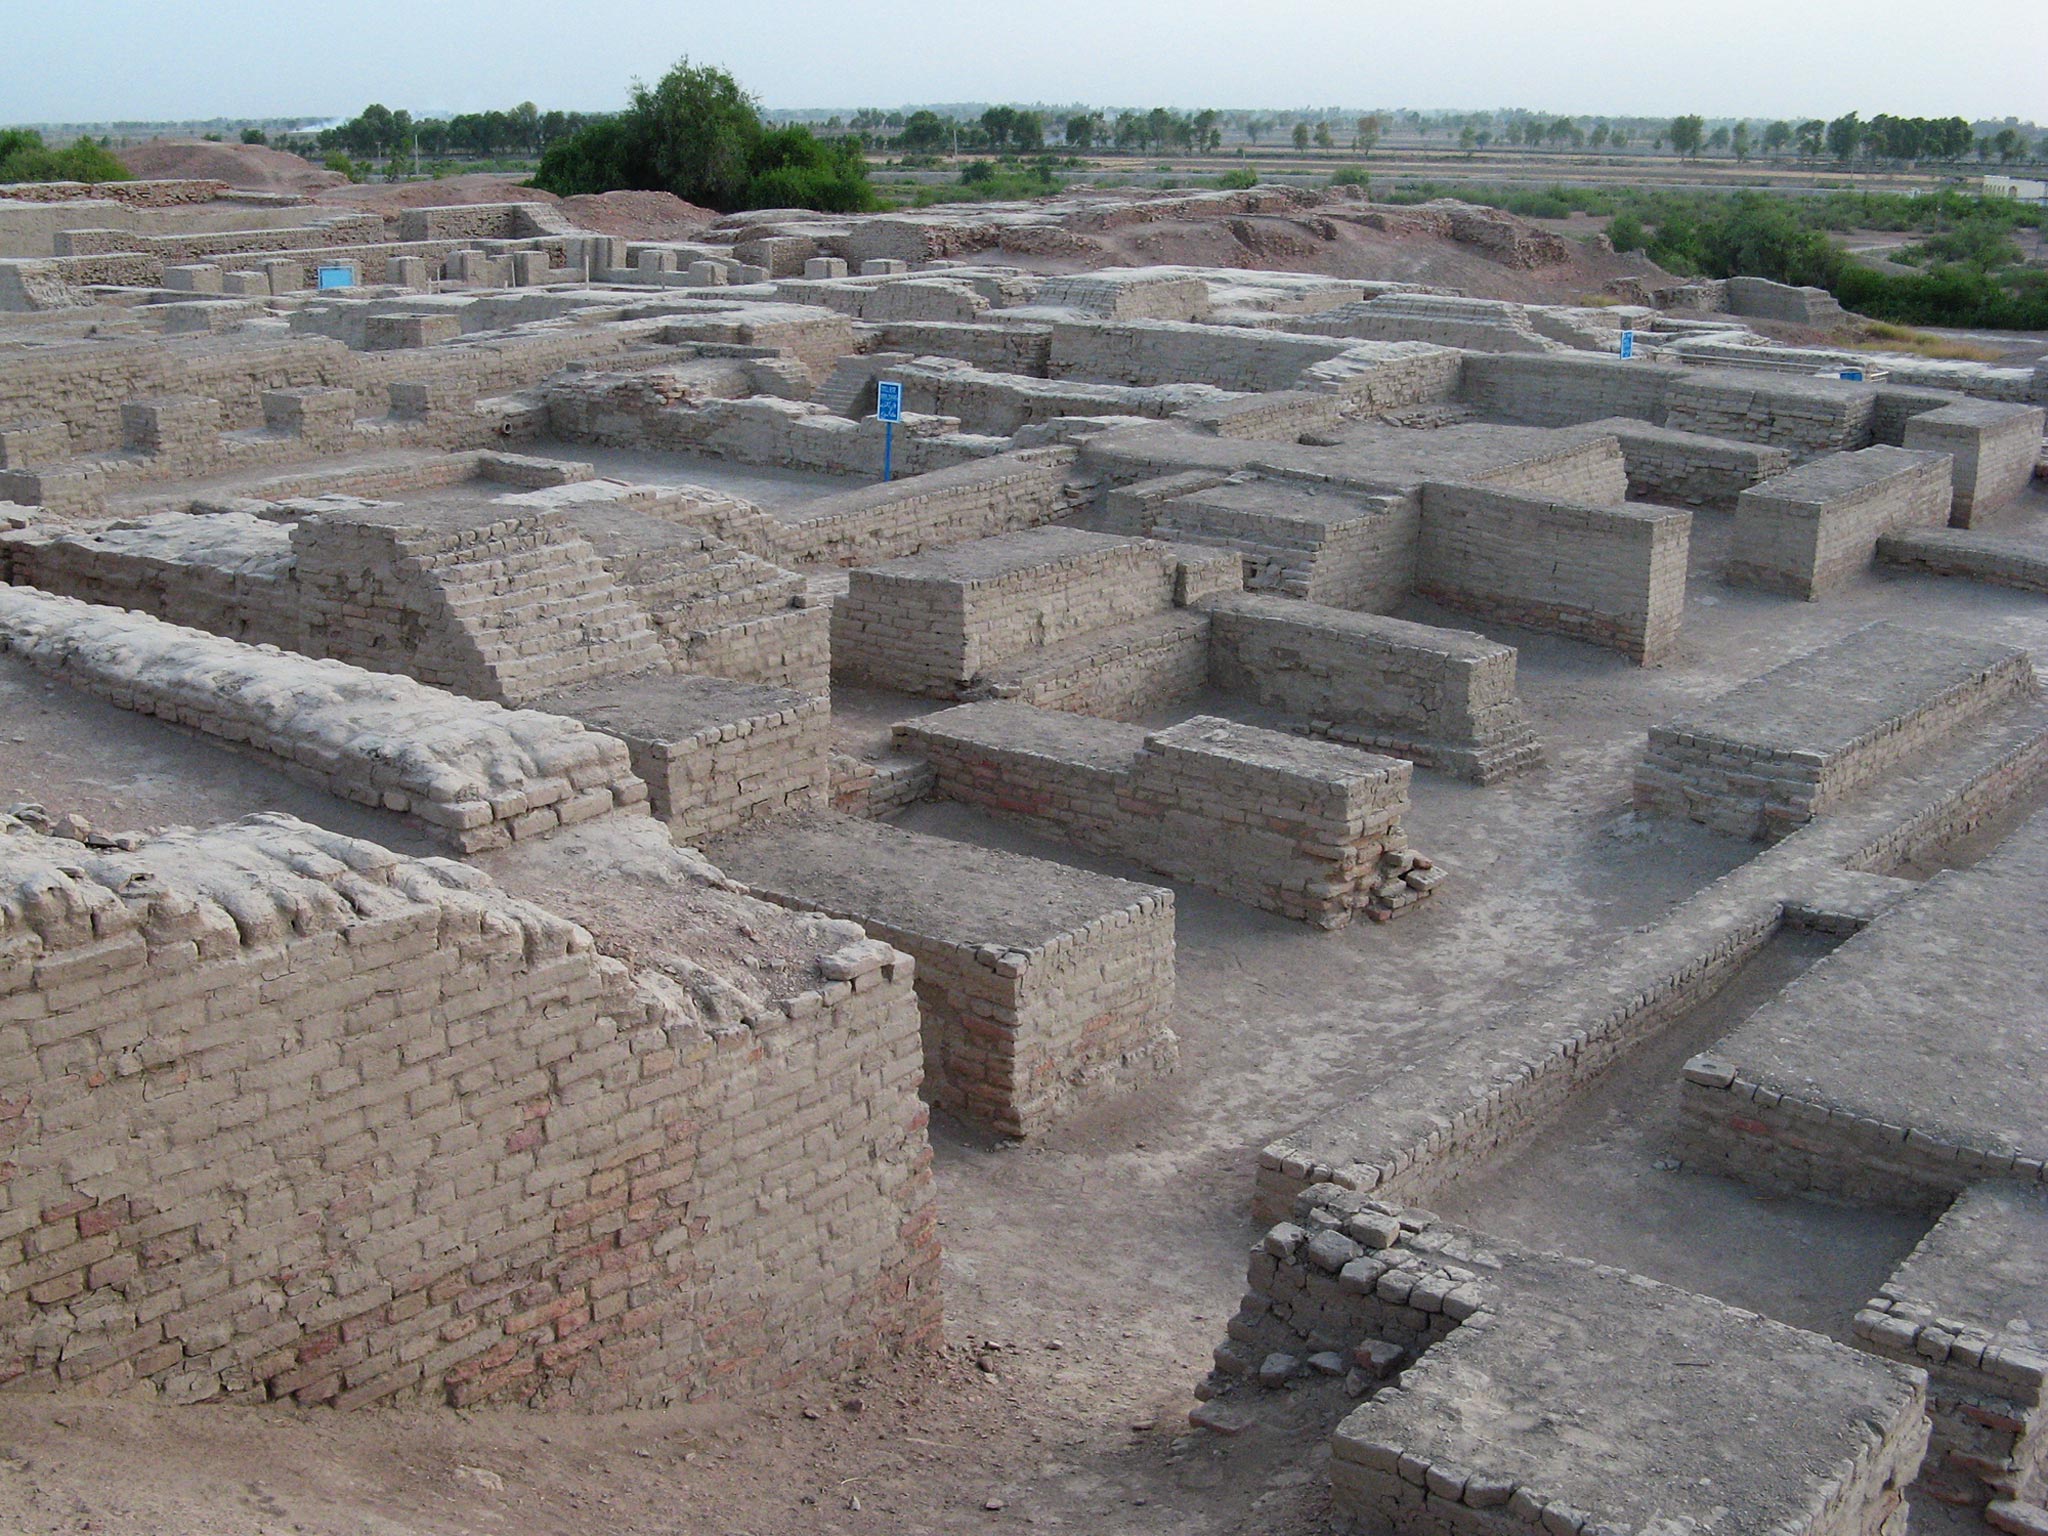 A city settlement at the Mohenjo-daro in Pakistan 